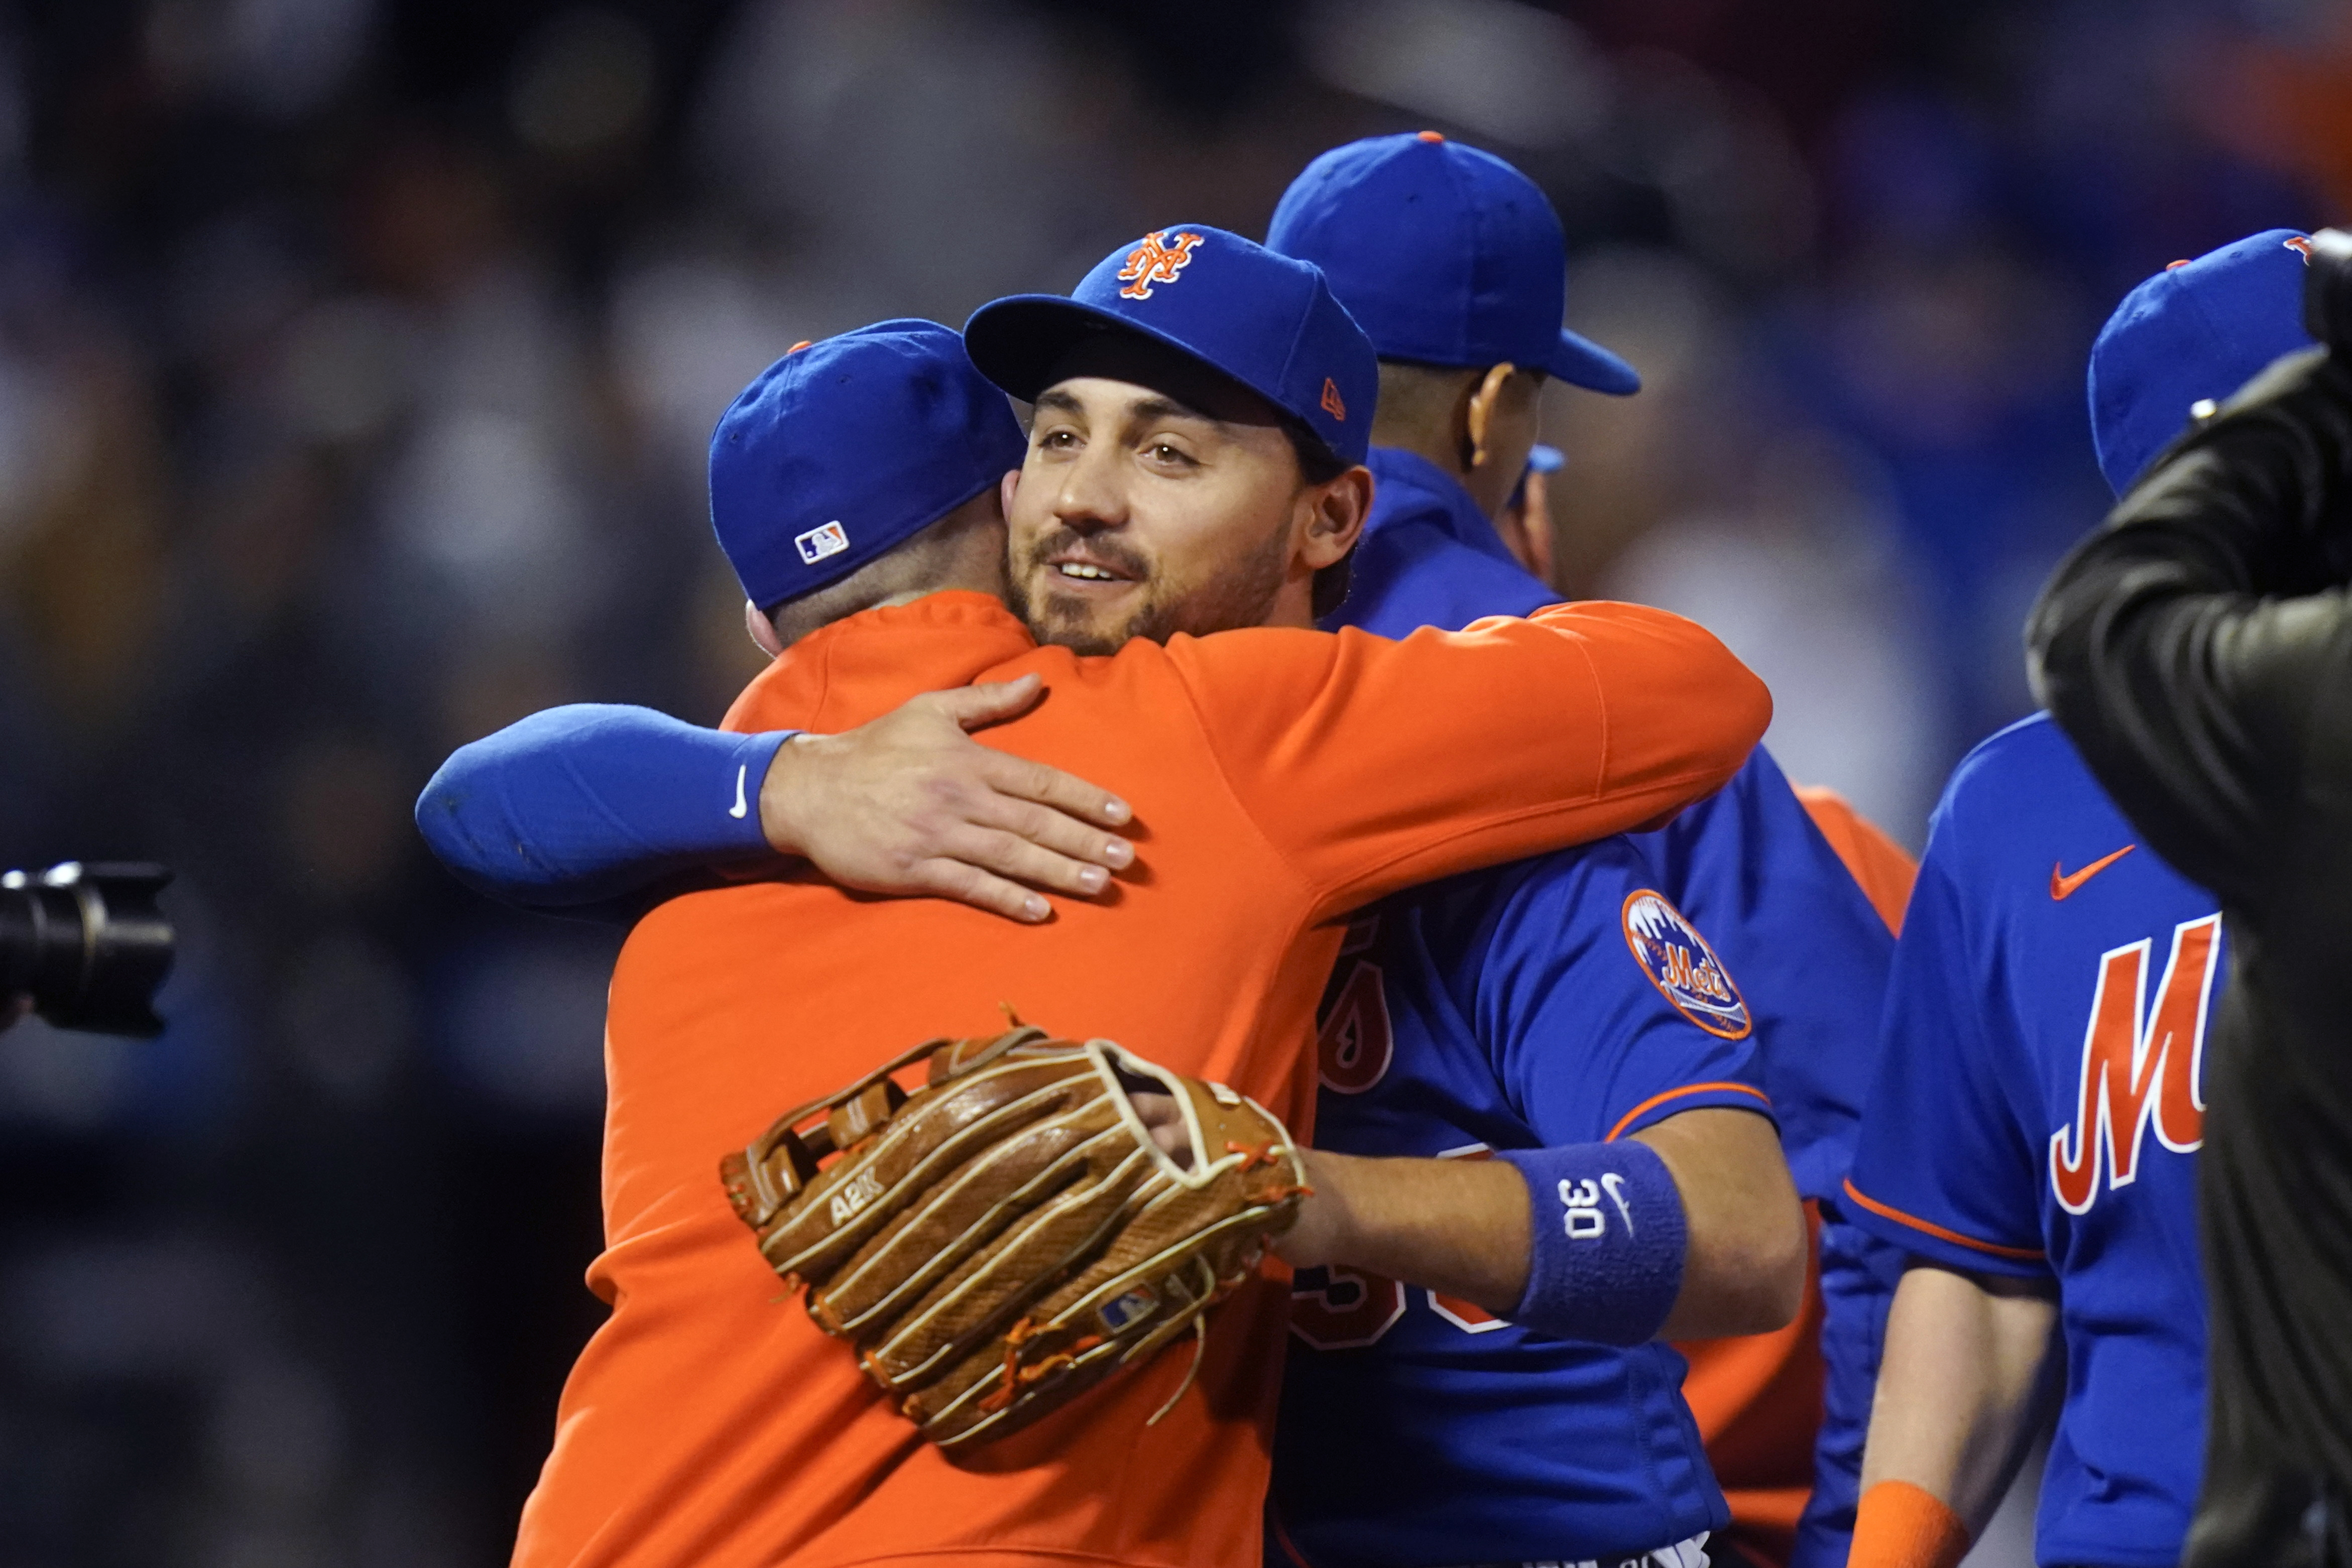 Mets' Michael Conforto recounts emotional night with future up in the air